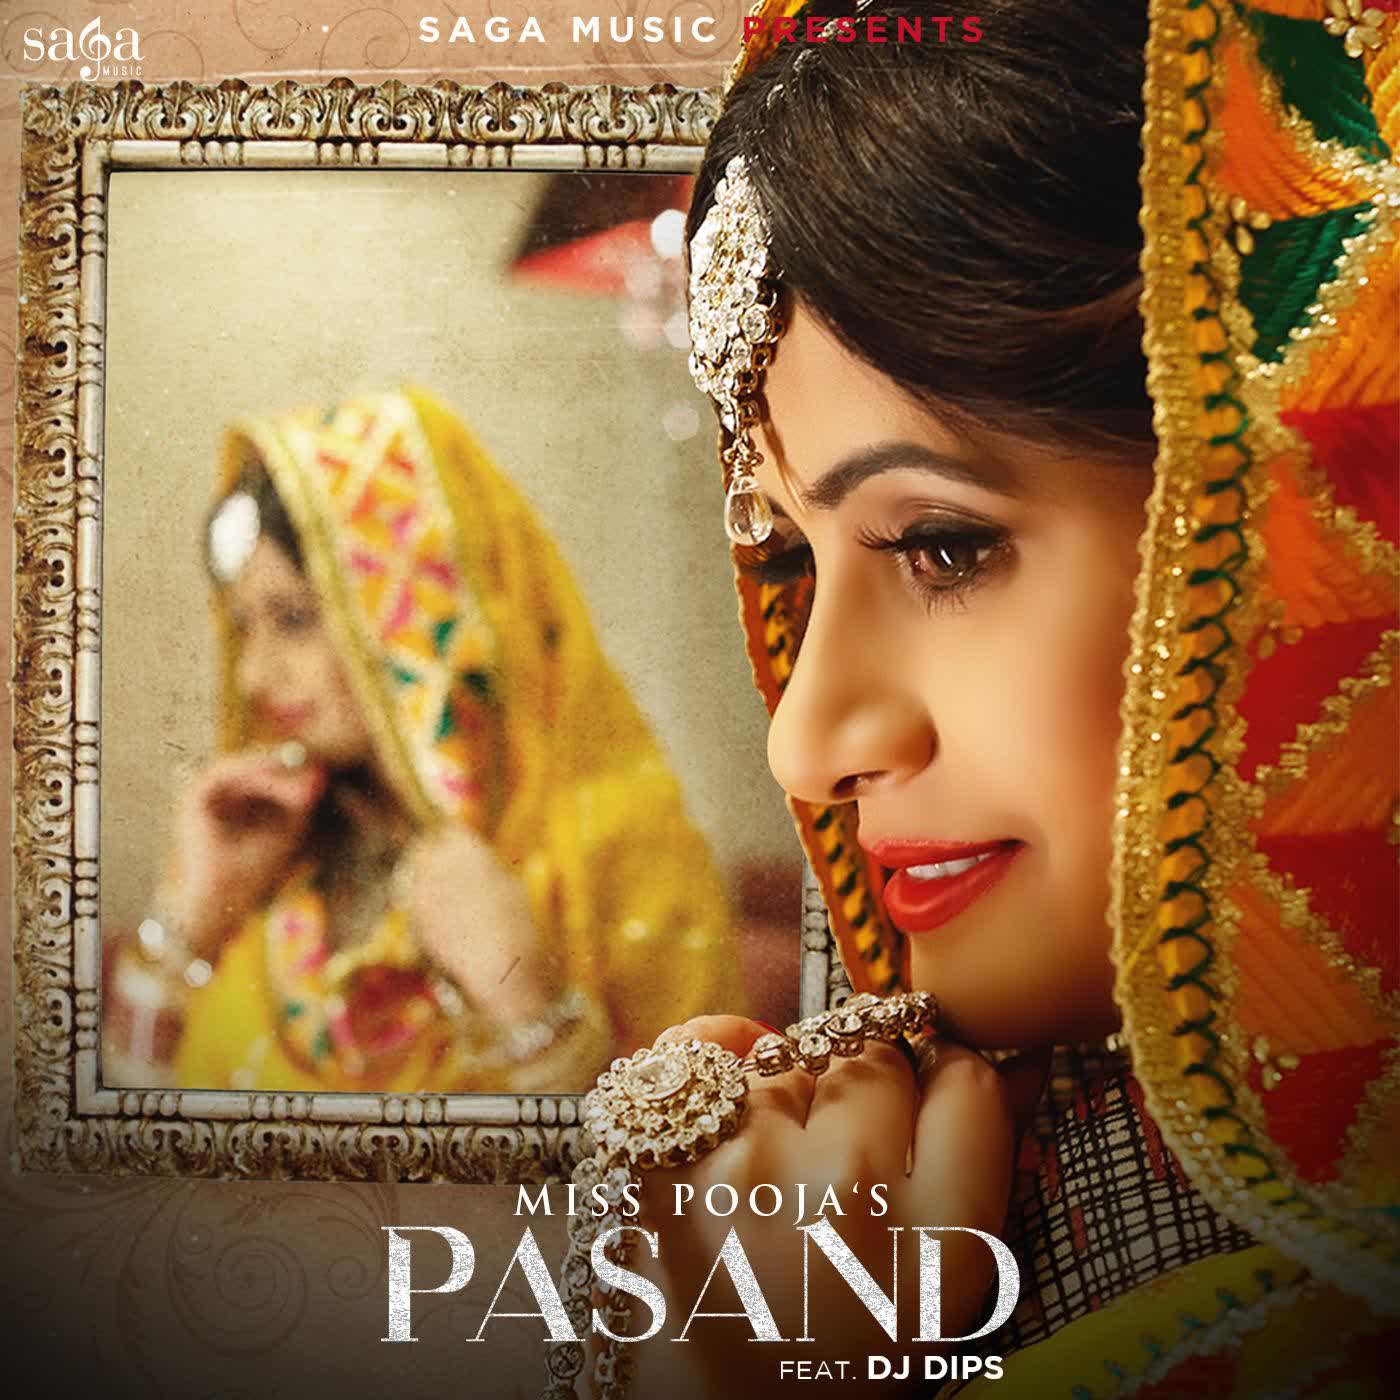 Pasand Miss Pooja mp3 song